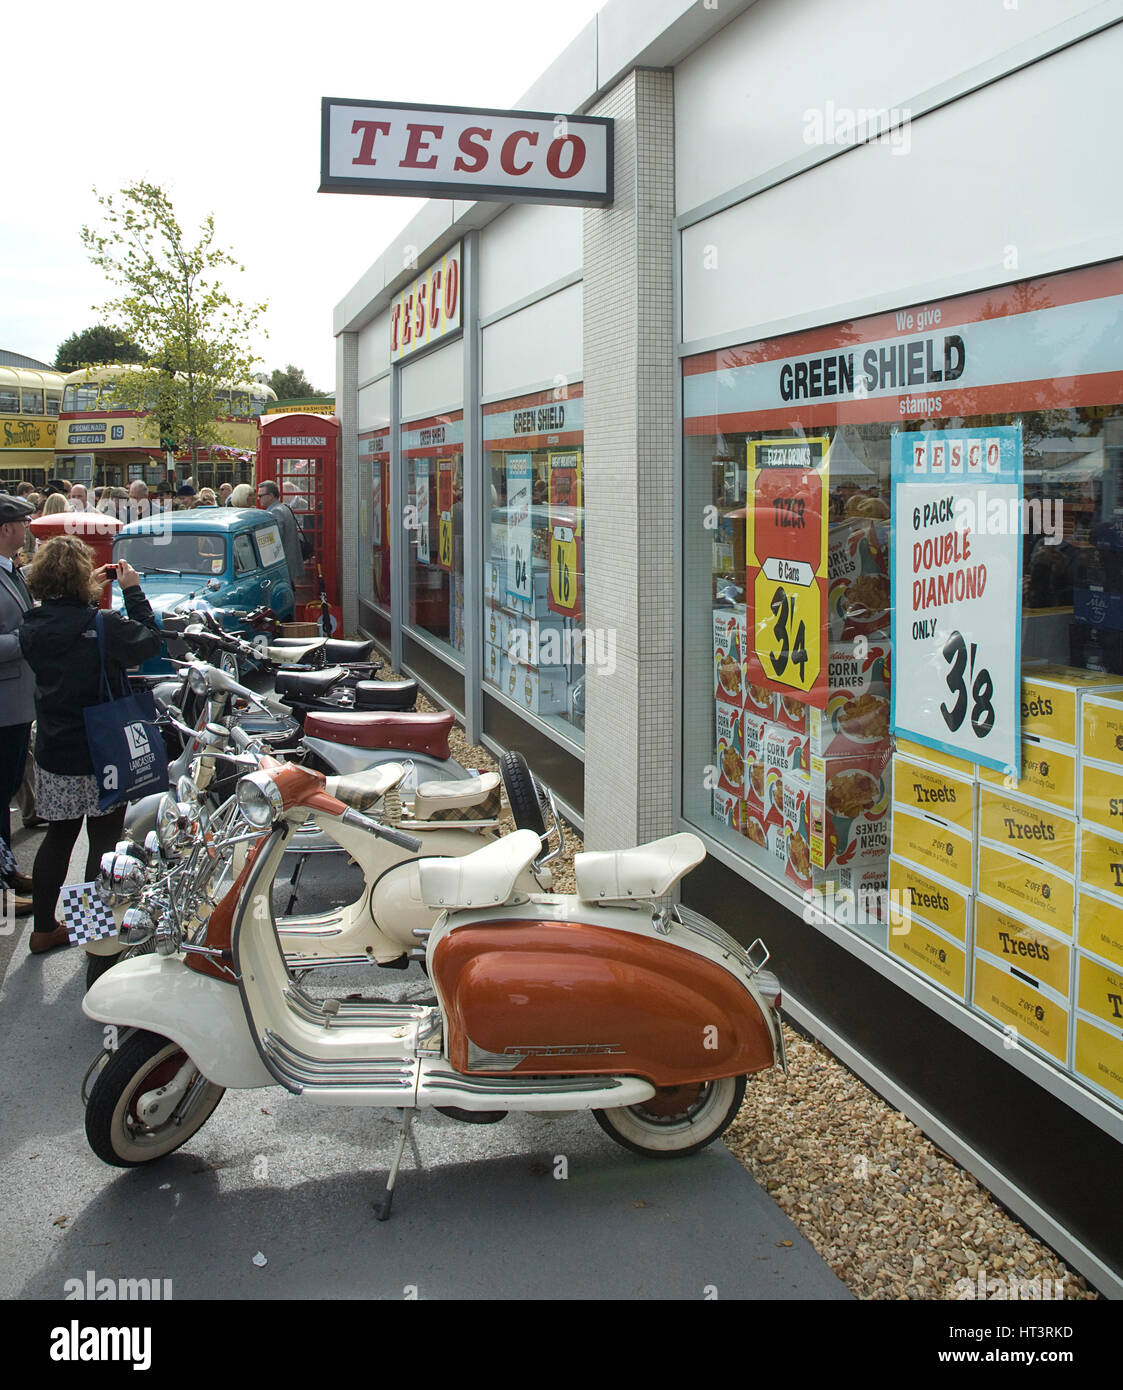 2011 Goodwood Revival Meeting, Tesco retro shop and scooters Artist: Unknown. Stock Photo